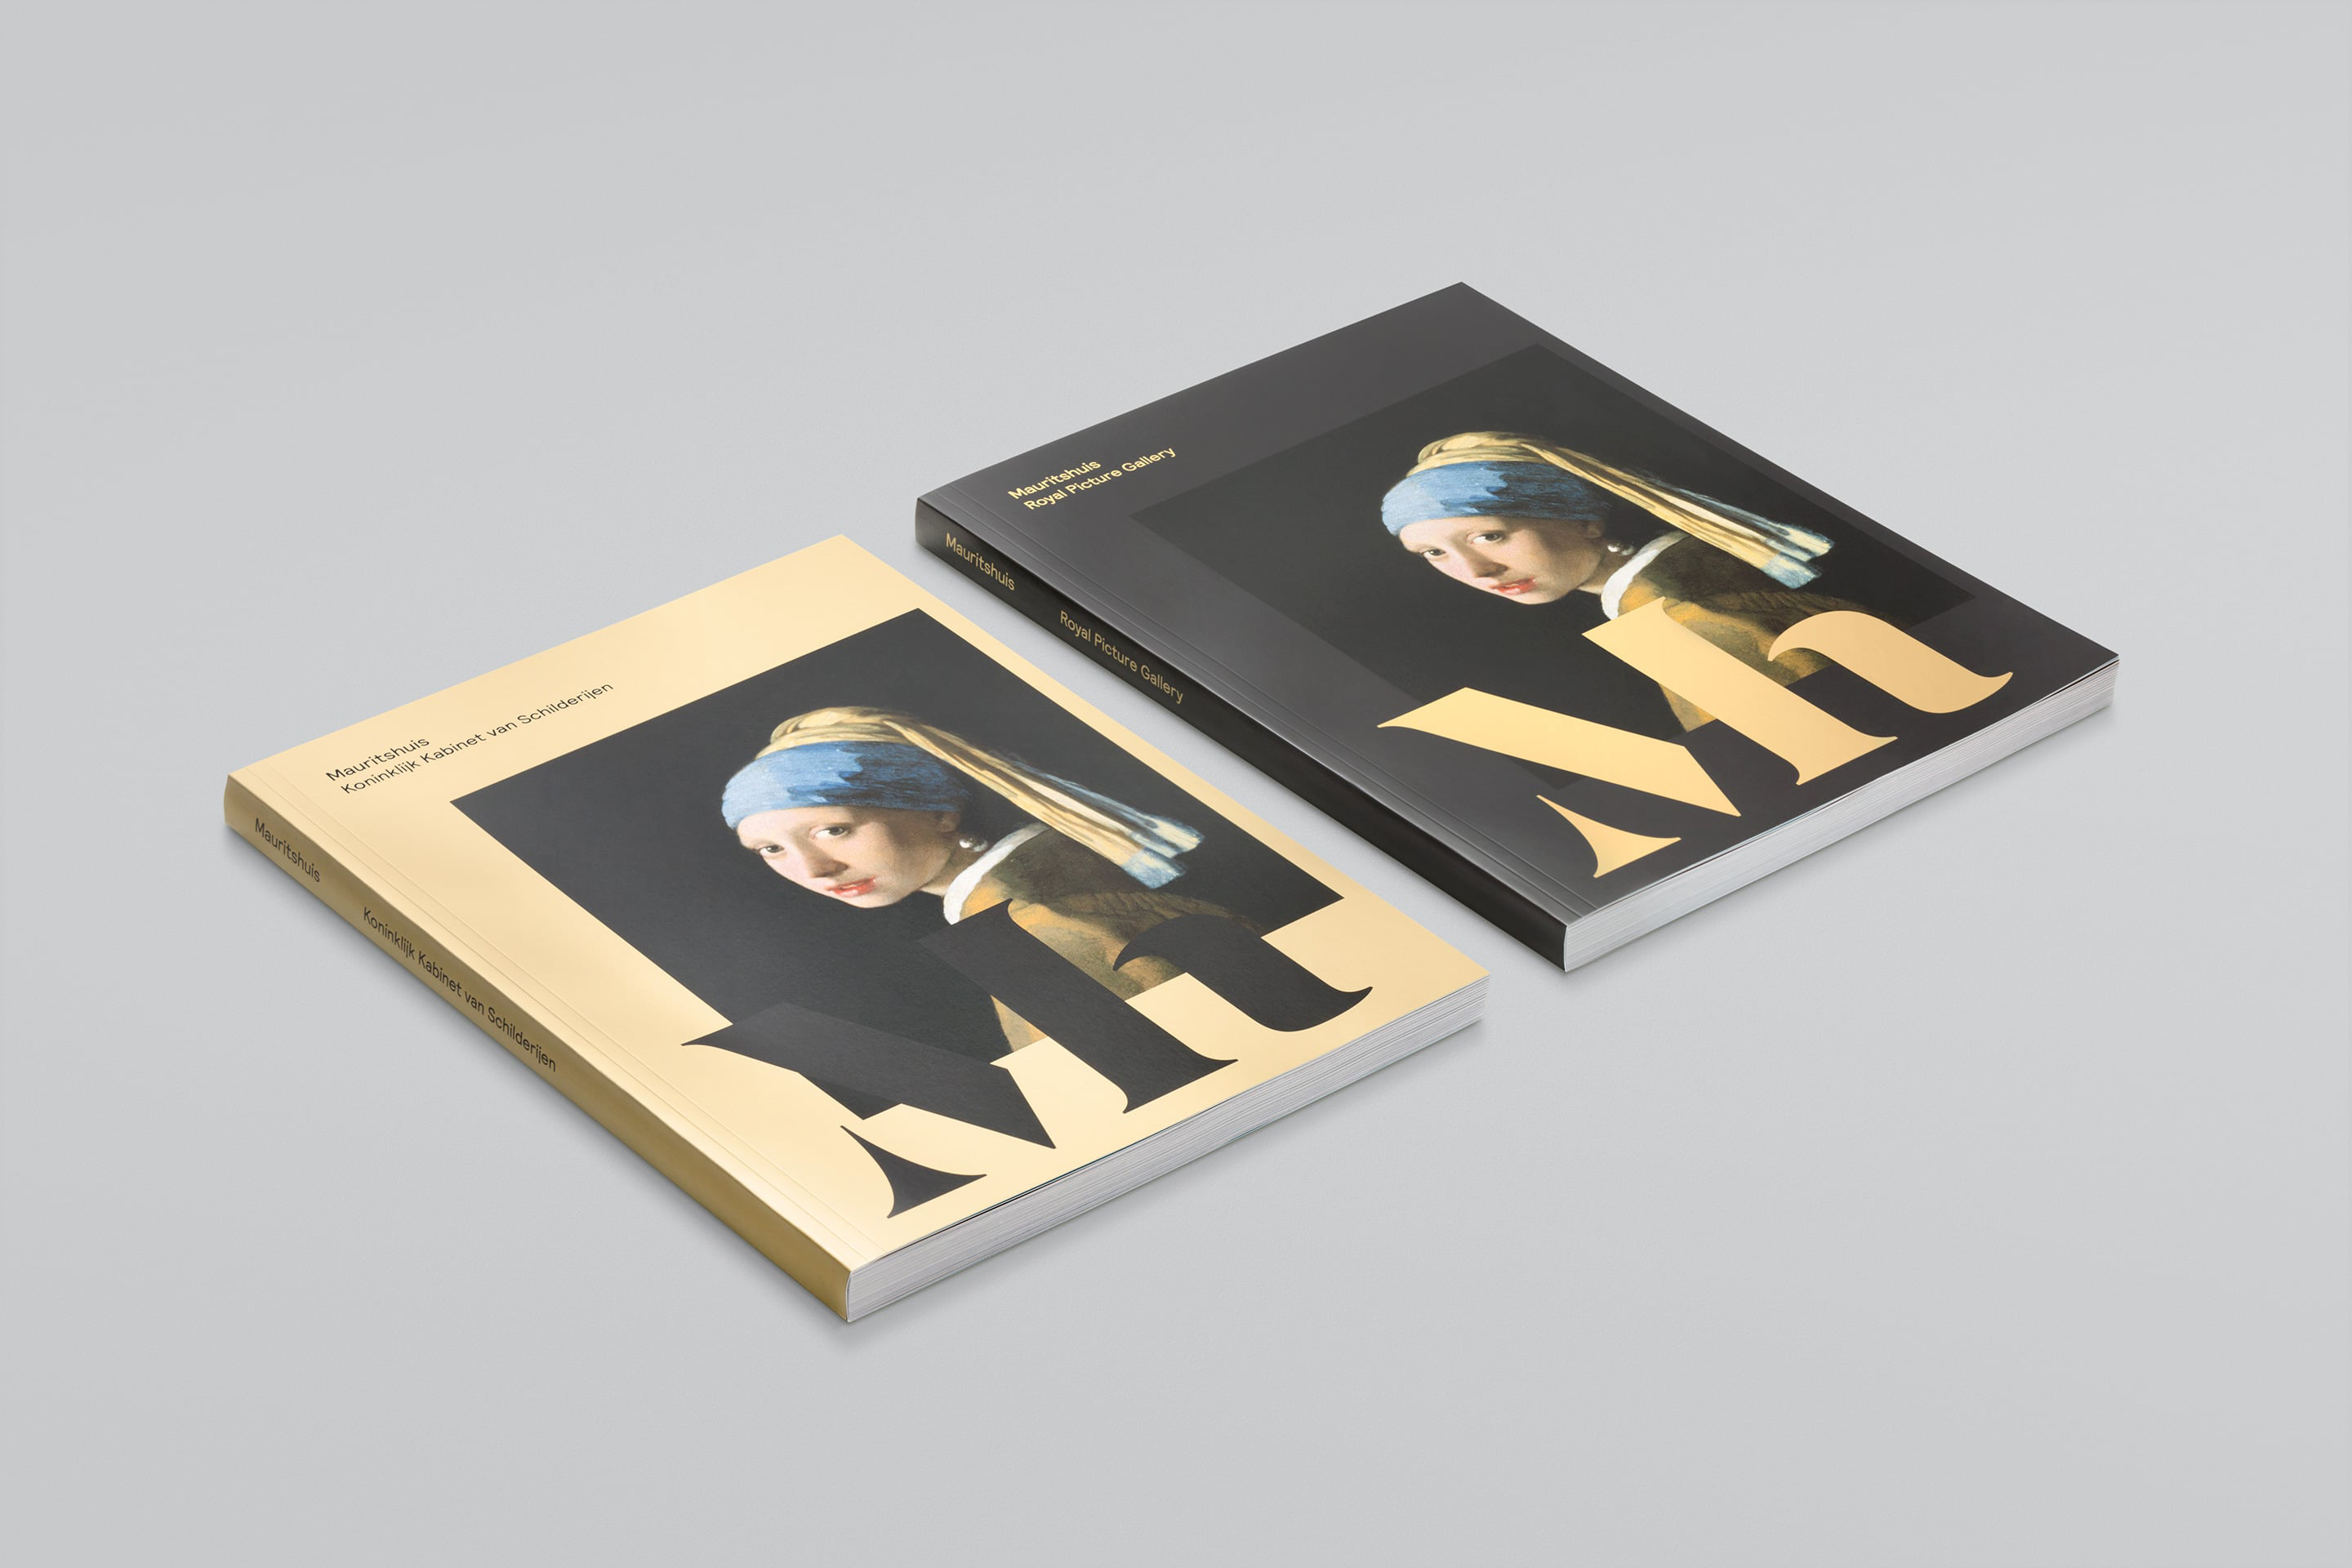 studio dumbar design visual brand identity for Mauritshuis Royal Picture Gallery Catologue design cover girl with the pearl earring monogram logo design cover